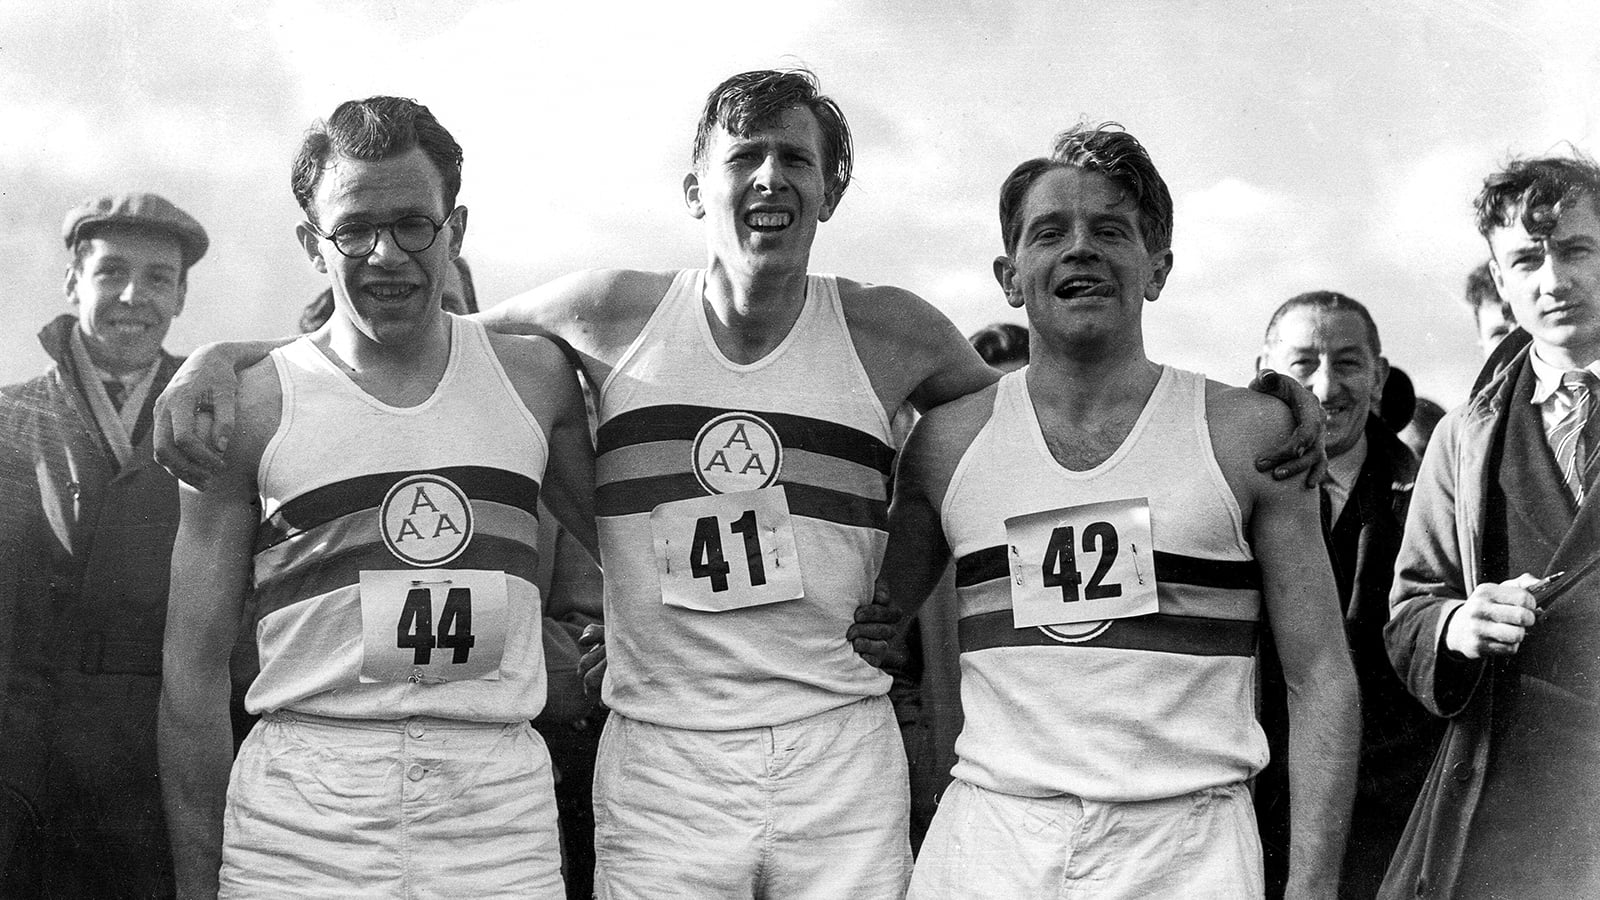 British runner Roger Bannister (centre) was the first to run a mile in less than four minutes back in 1954. (Photo: Smith Archive / Alamy Stock Photo)